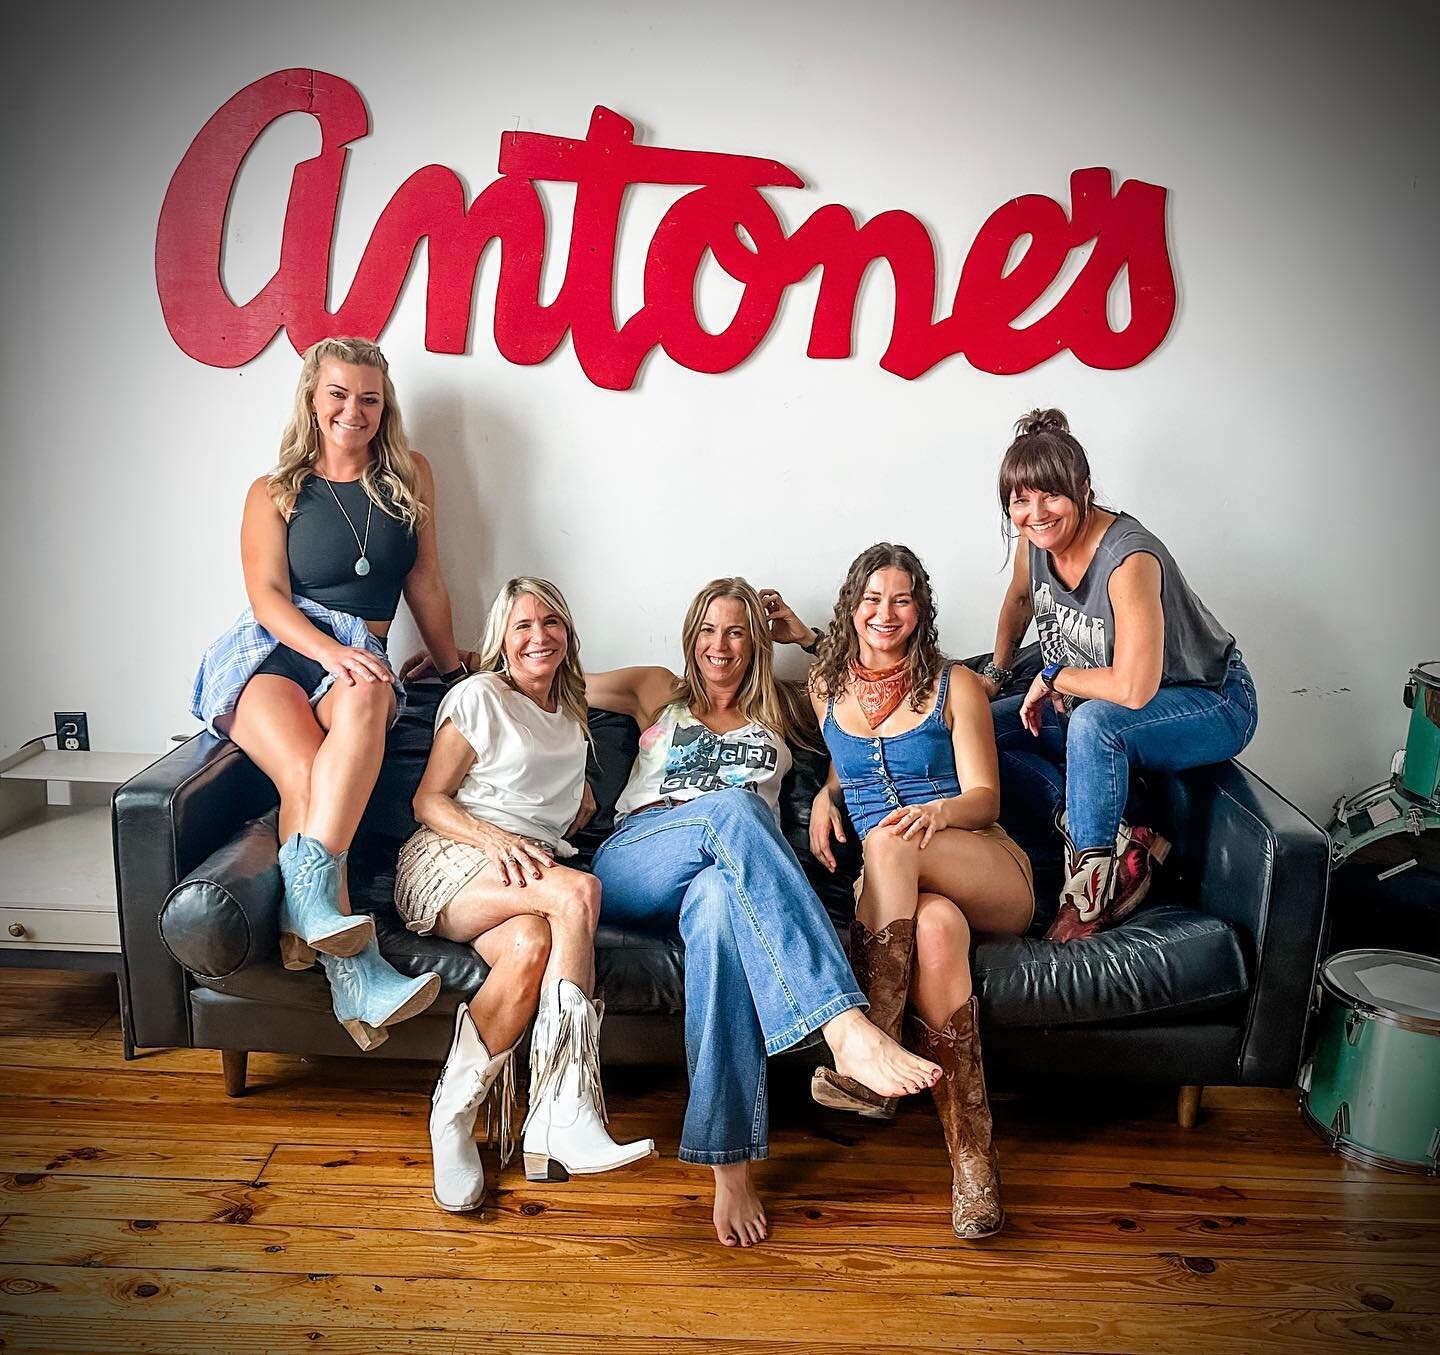 Great show today at Antone&rsquo;s! So much fun debuting our latest cover of Shane Smith &amp; The Saints - &ldquo;Dance The Night Away.&rdquo;
.
. 
.
#rhinestonerenegades #girlguitaraustin #girlguitar #countrycoverband #countrygirlband #girlswhorock